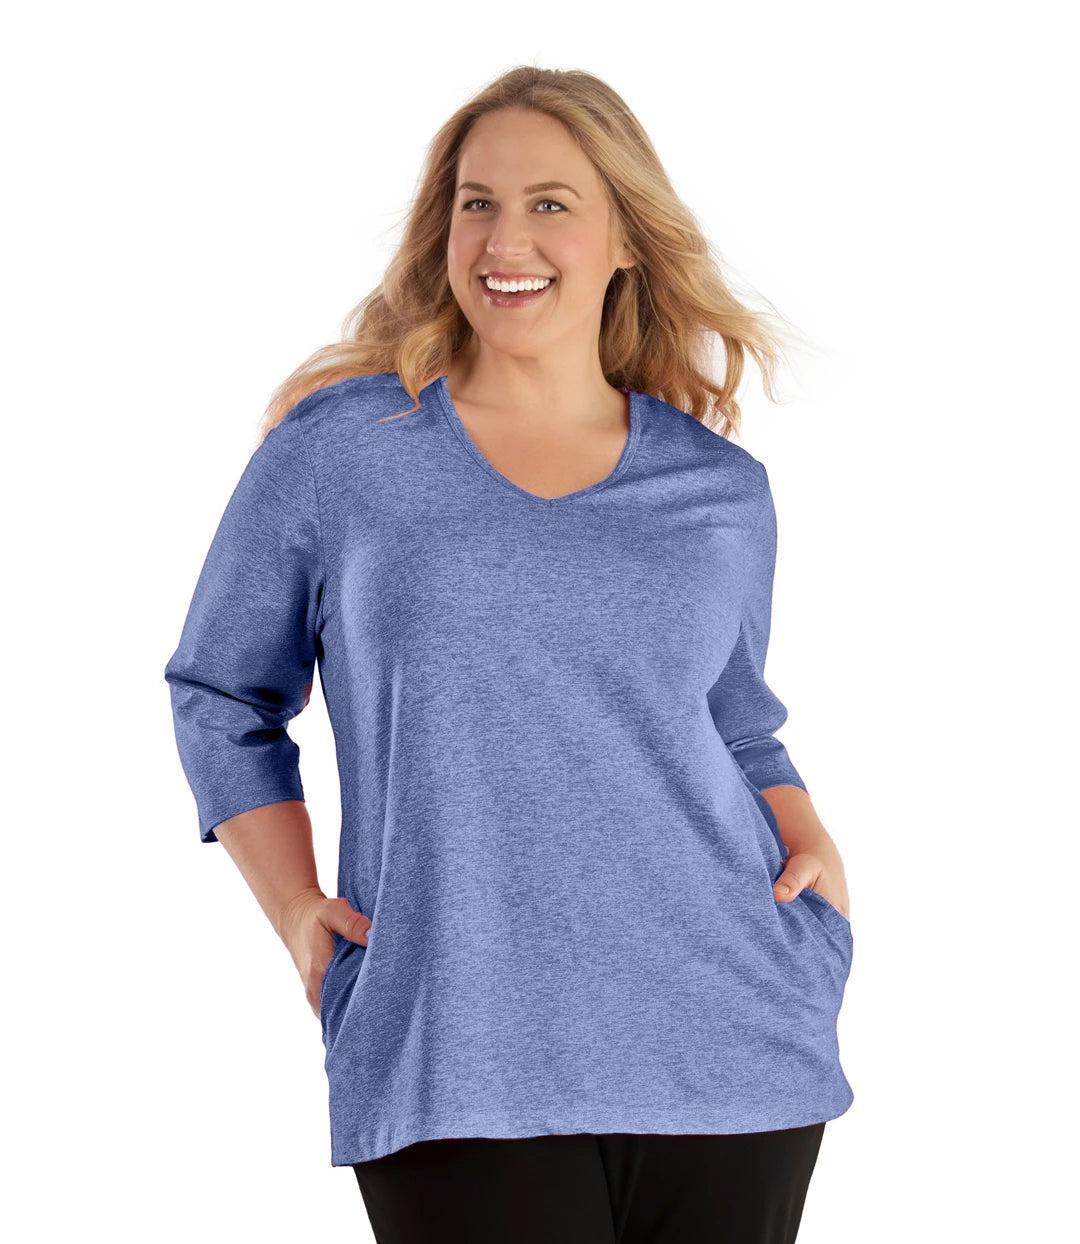 Plus size woman, facing front, wearing JunoActive plus size SoftWik V-Neck ¾ Sleeve Top with Pockets in the color Heather Royal. She is wearing JunoActive Plus Size Leggings in the color Black.